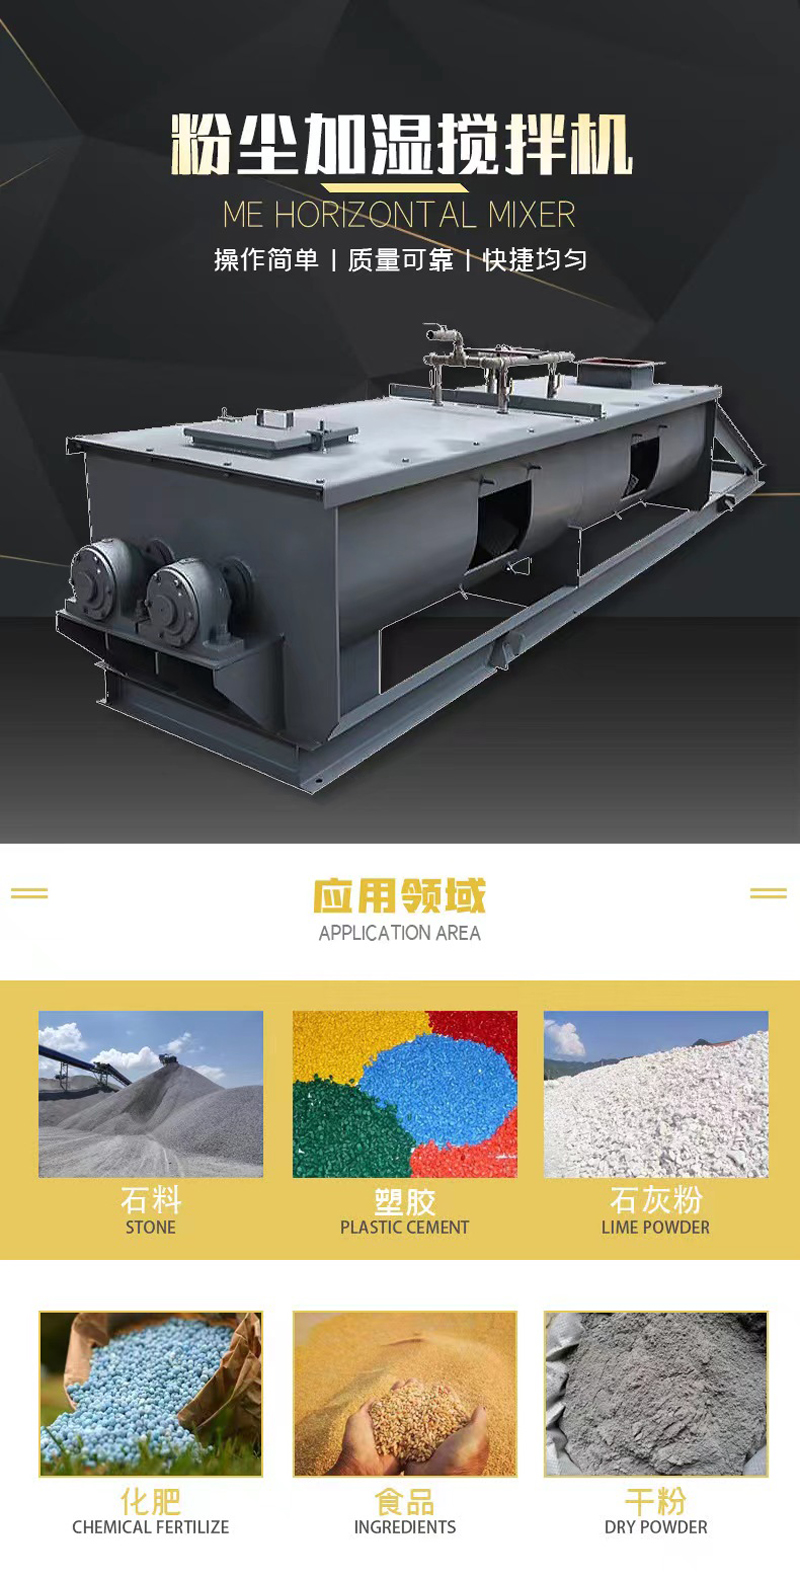 Industrial double axis dust humidification mixer, horizontal dry powder mixer, Xinjunze seal tightly